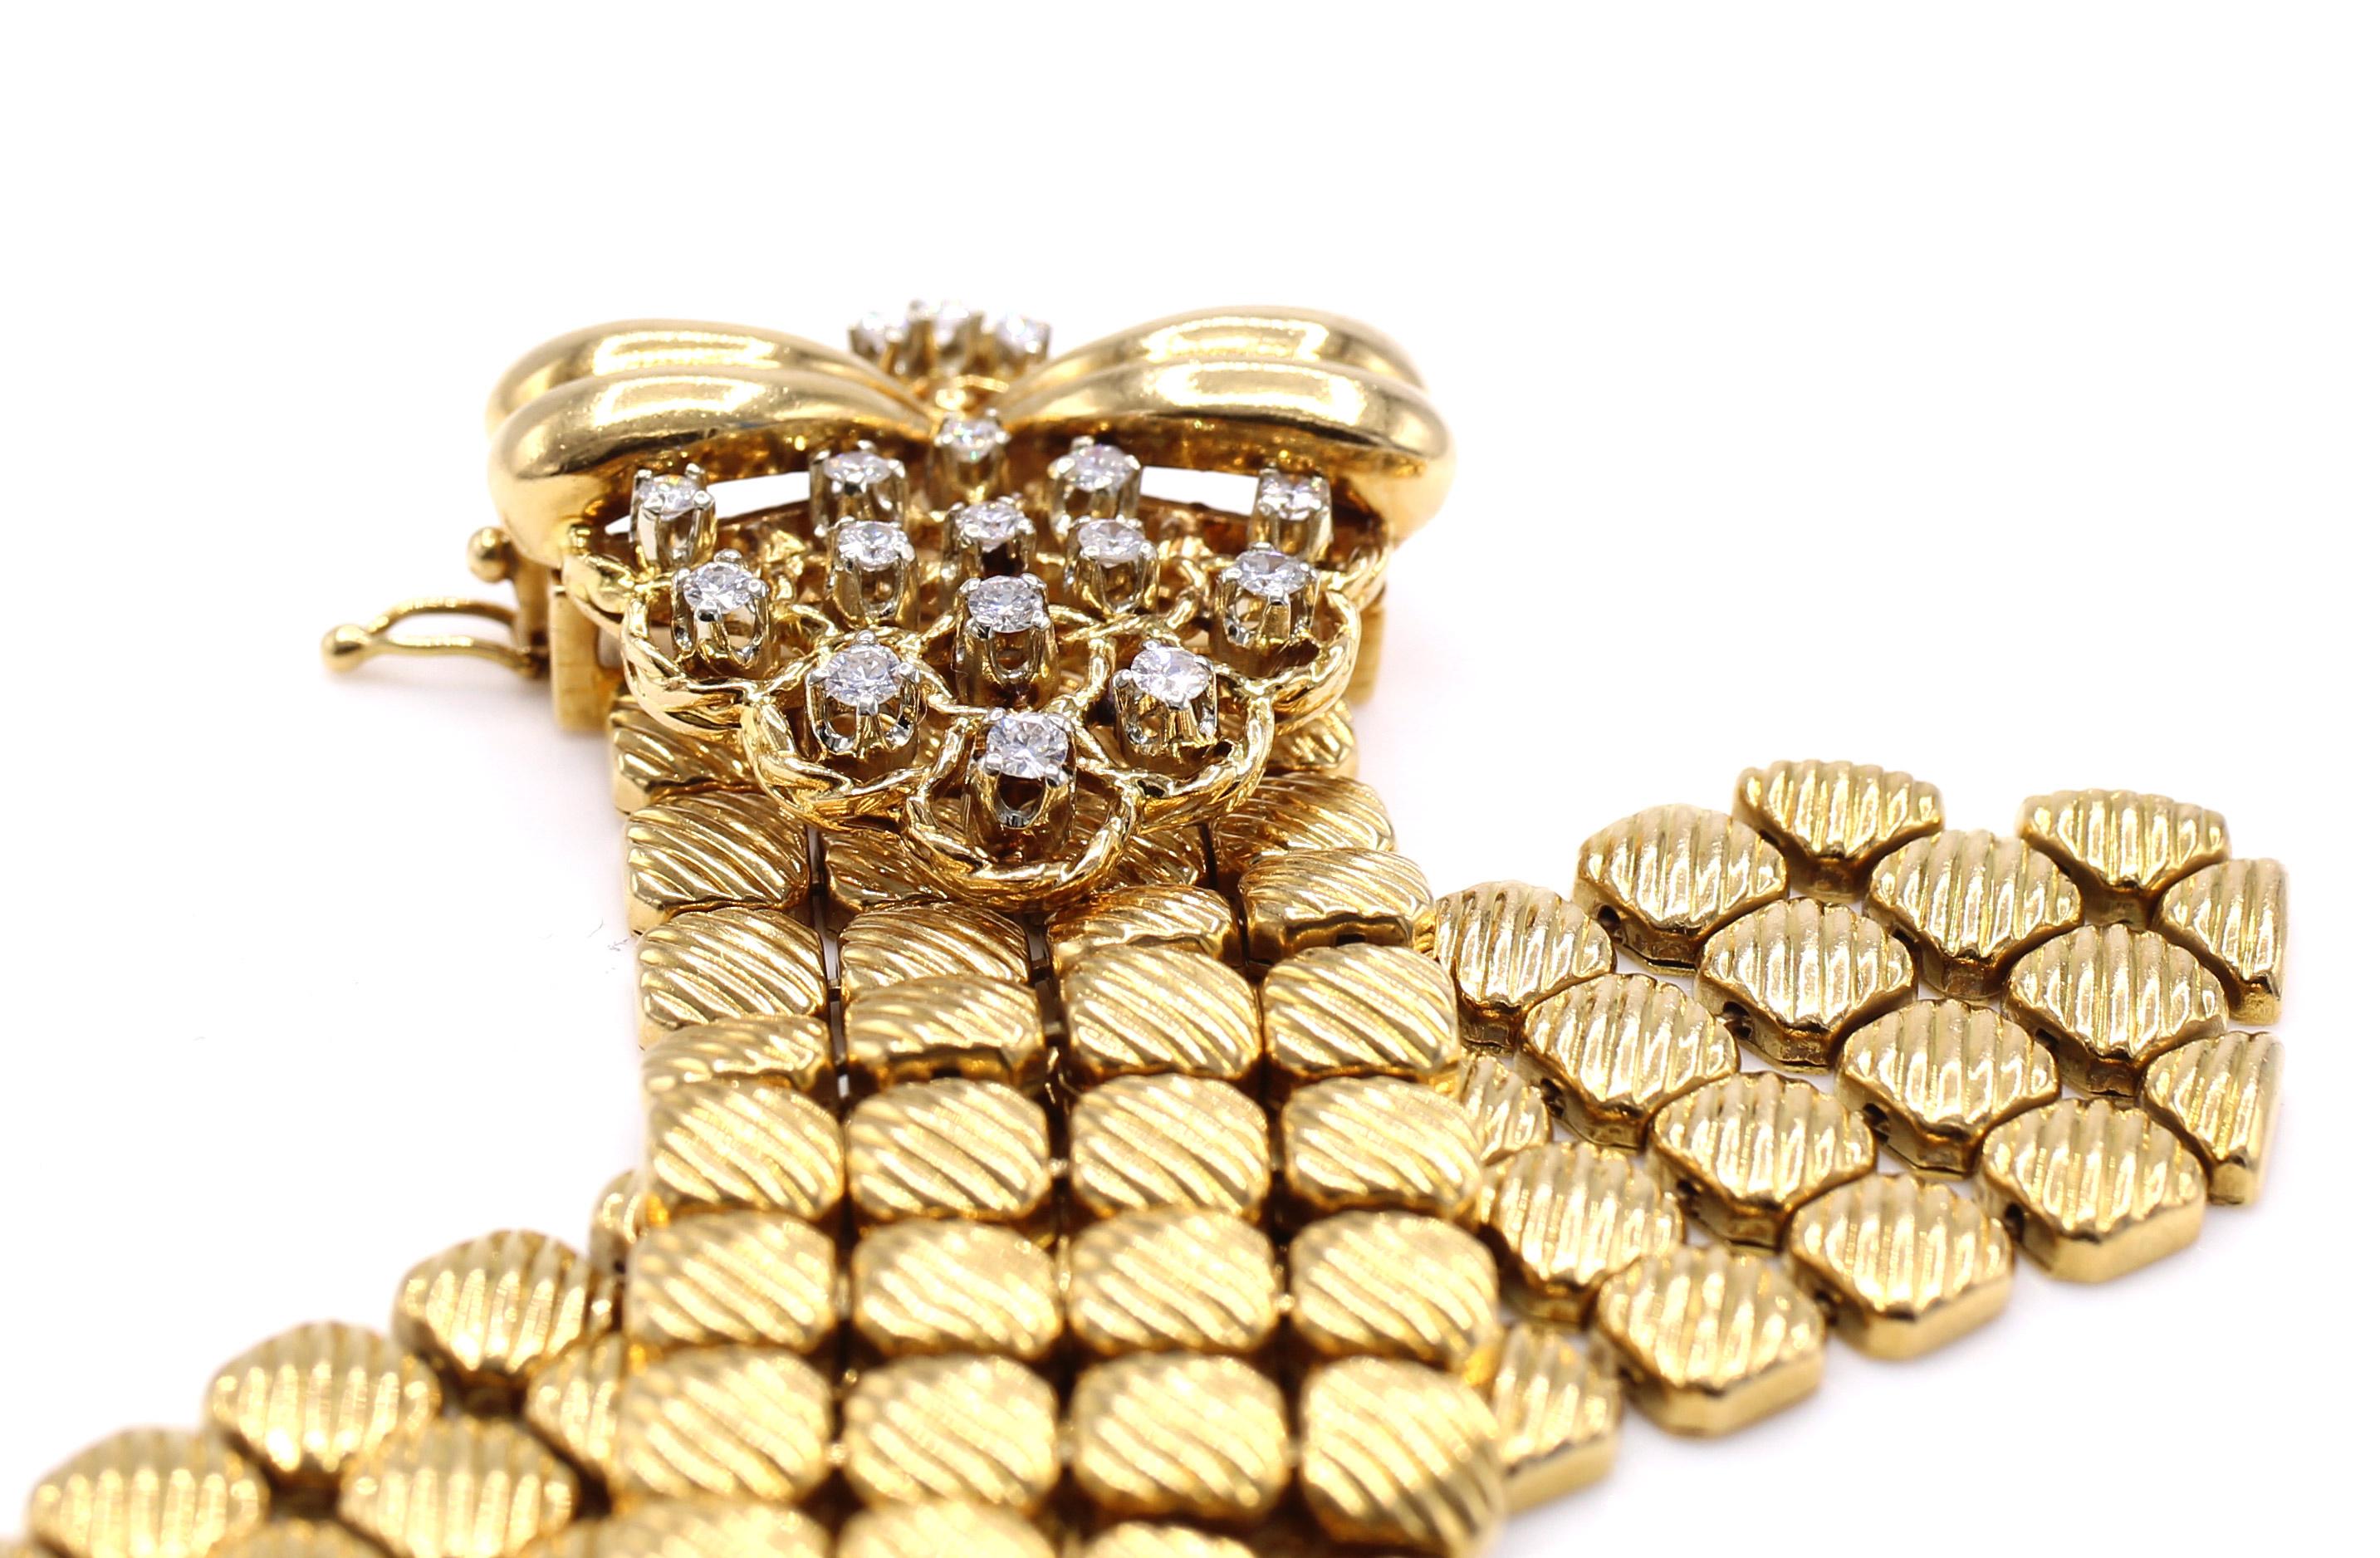 Superb Retro Diamond 18 Karat Buckle Bracelet In Excellent Condition For Sale In New York, NY